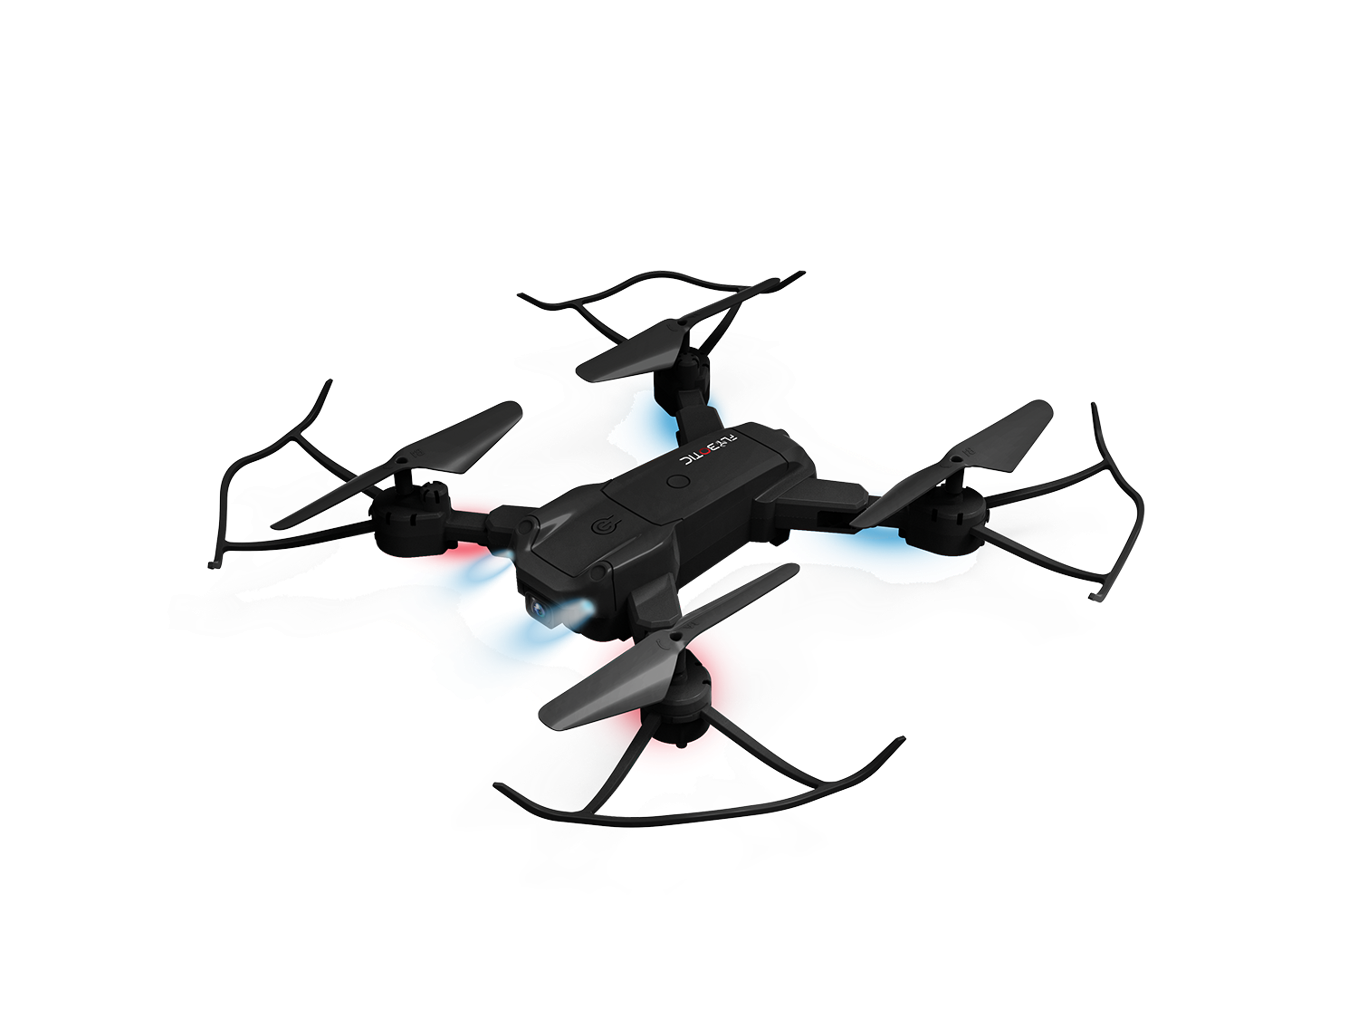 Silverlit Flybotic Foldable Drone - Robbis Hobby Shop